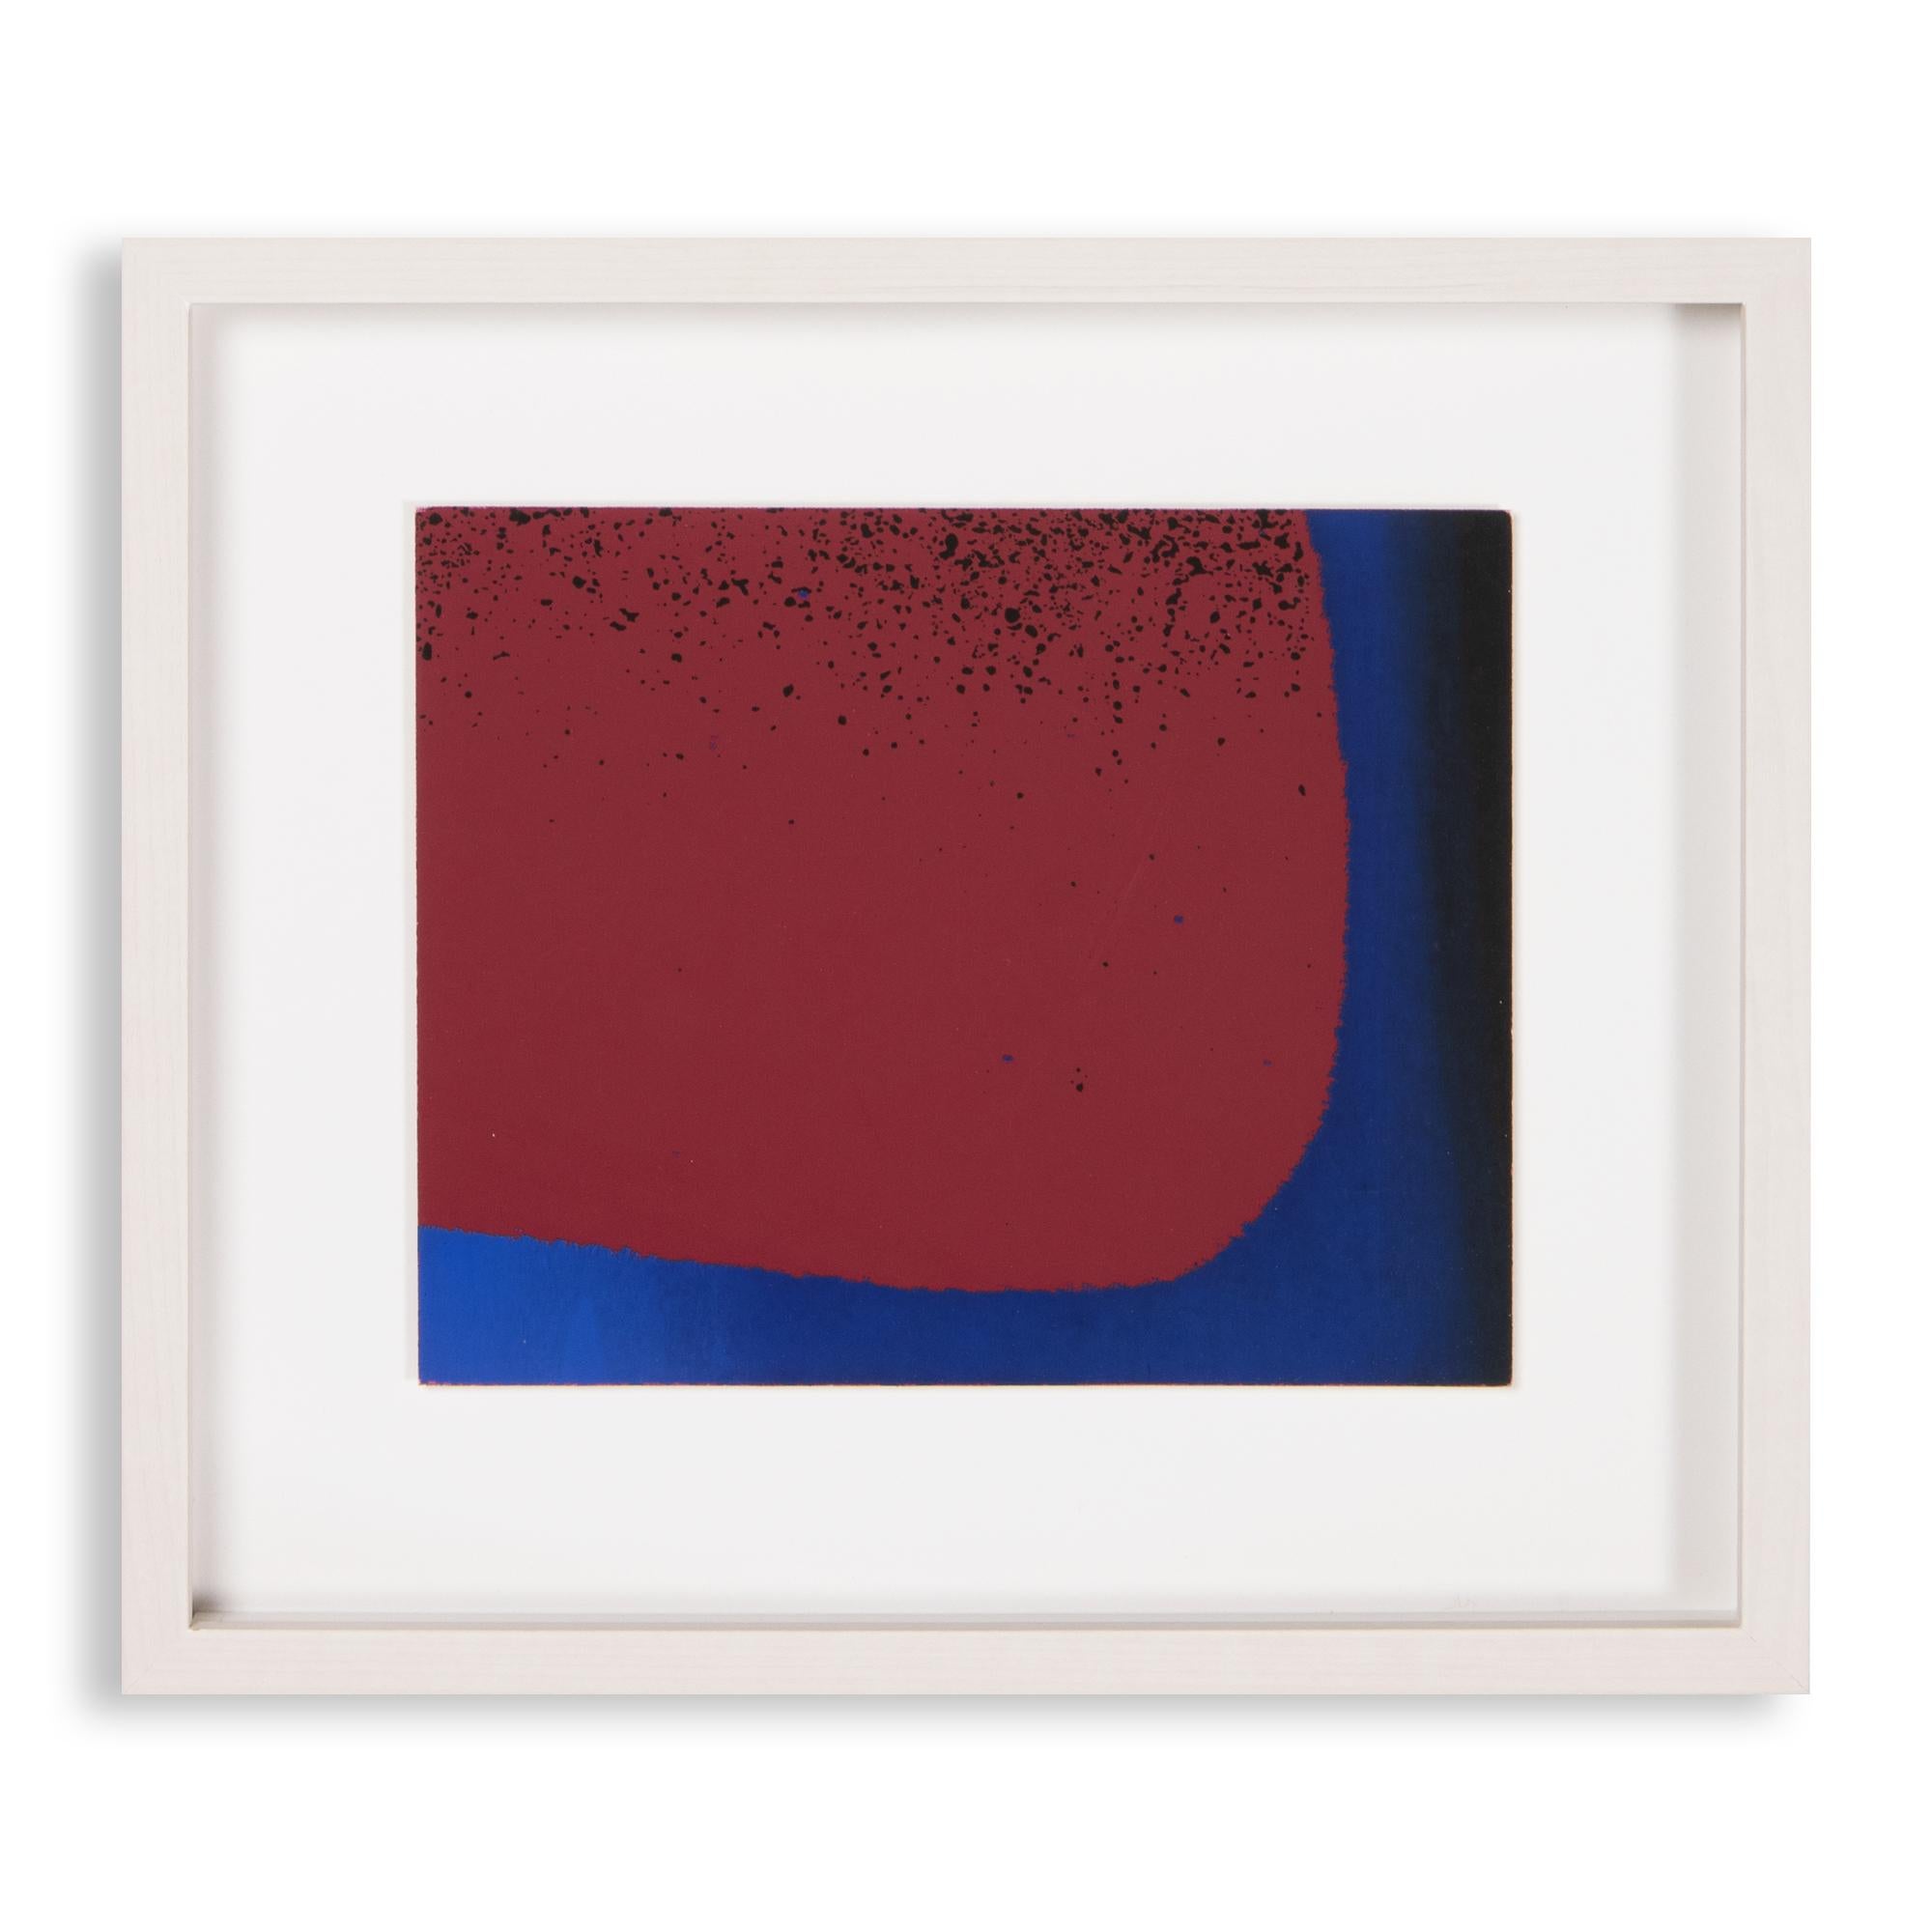 Rupprecht Geiger (German, 1908 – 2009)
Bluish Red and Blue-Black, 1961
Medium: Screenprint on cardboard
Dimensions: 16.7 x 20.6 cm
Framed dimensions: 31.4 x 27.5 x 2.9 cm
Edition of 50: Hand-signed and numbered
Catalogue raisonné: WVG 41
Condition: